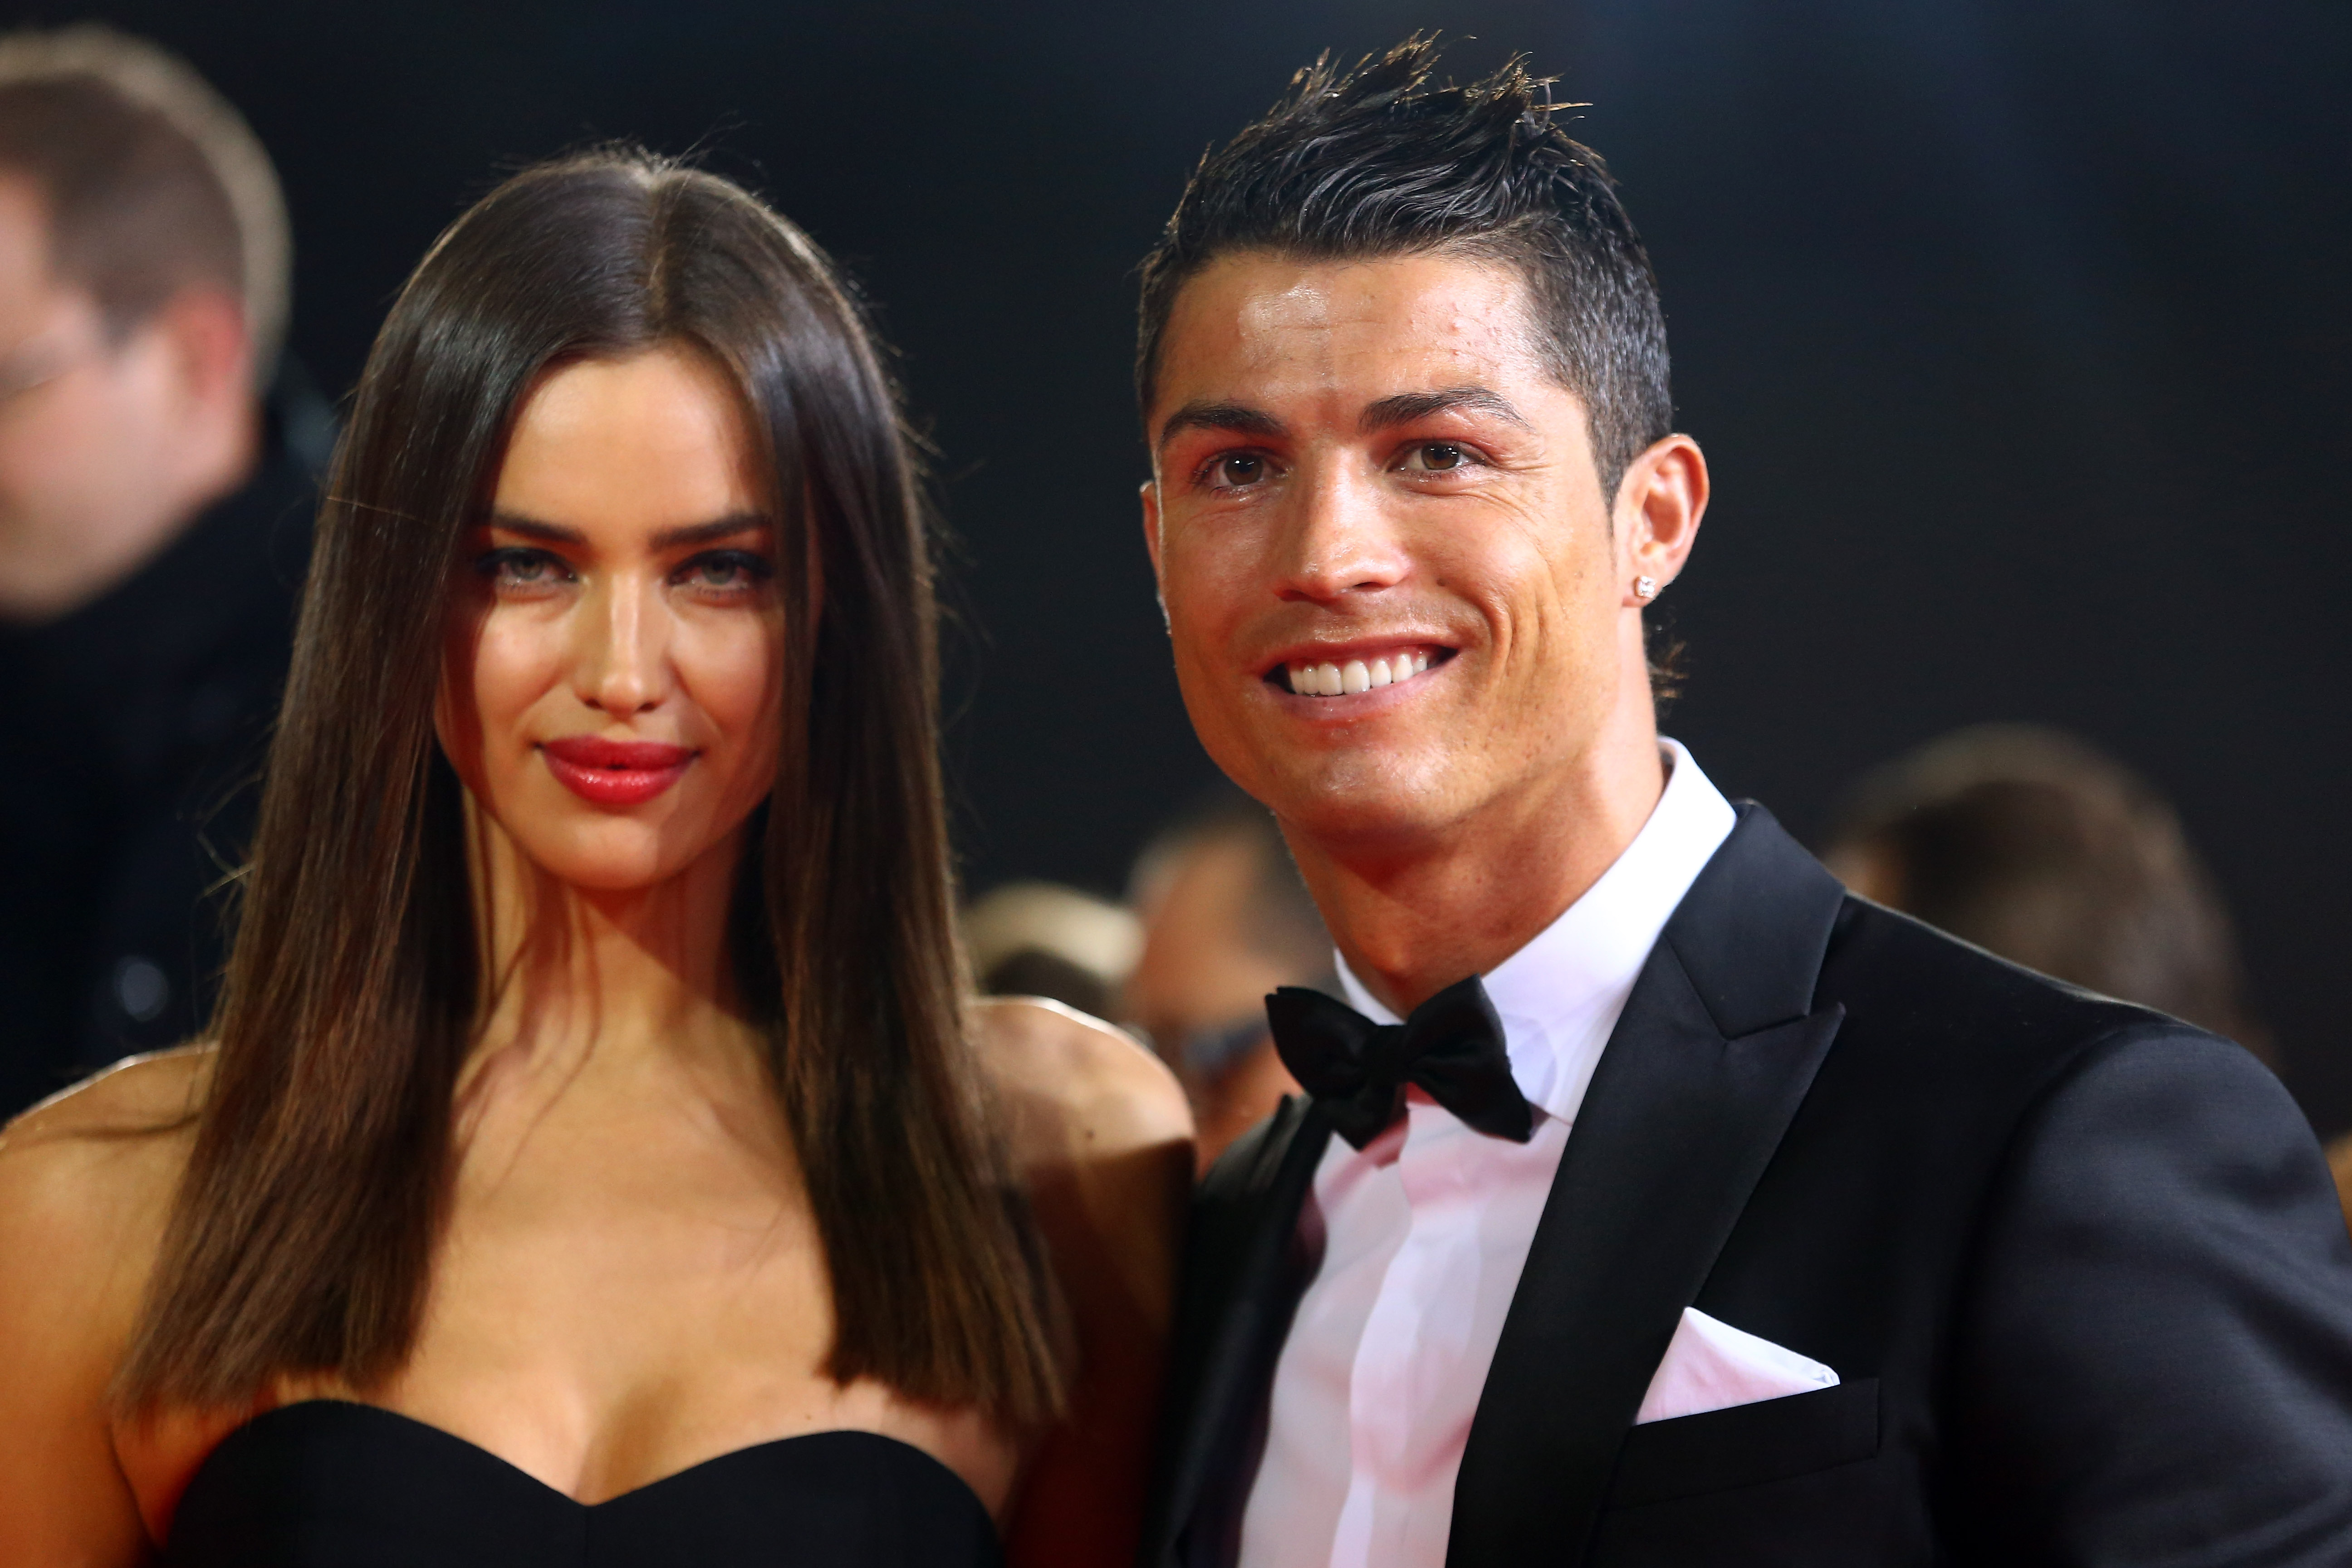 ZURICH, SWITZERLAND - JANUARY 07: (L-R) Irina Shayk and Cristiano Ronaldo of Real Madrid pose during the red carpet arrivals for the FIFA Ballon d’Or Gala 2012 on January 7, 2013 at Congress House in Zurich, Switzerland. (Photo by Christof Koepsel/Getty Images)